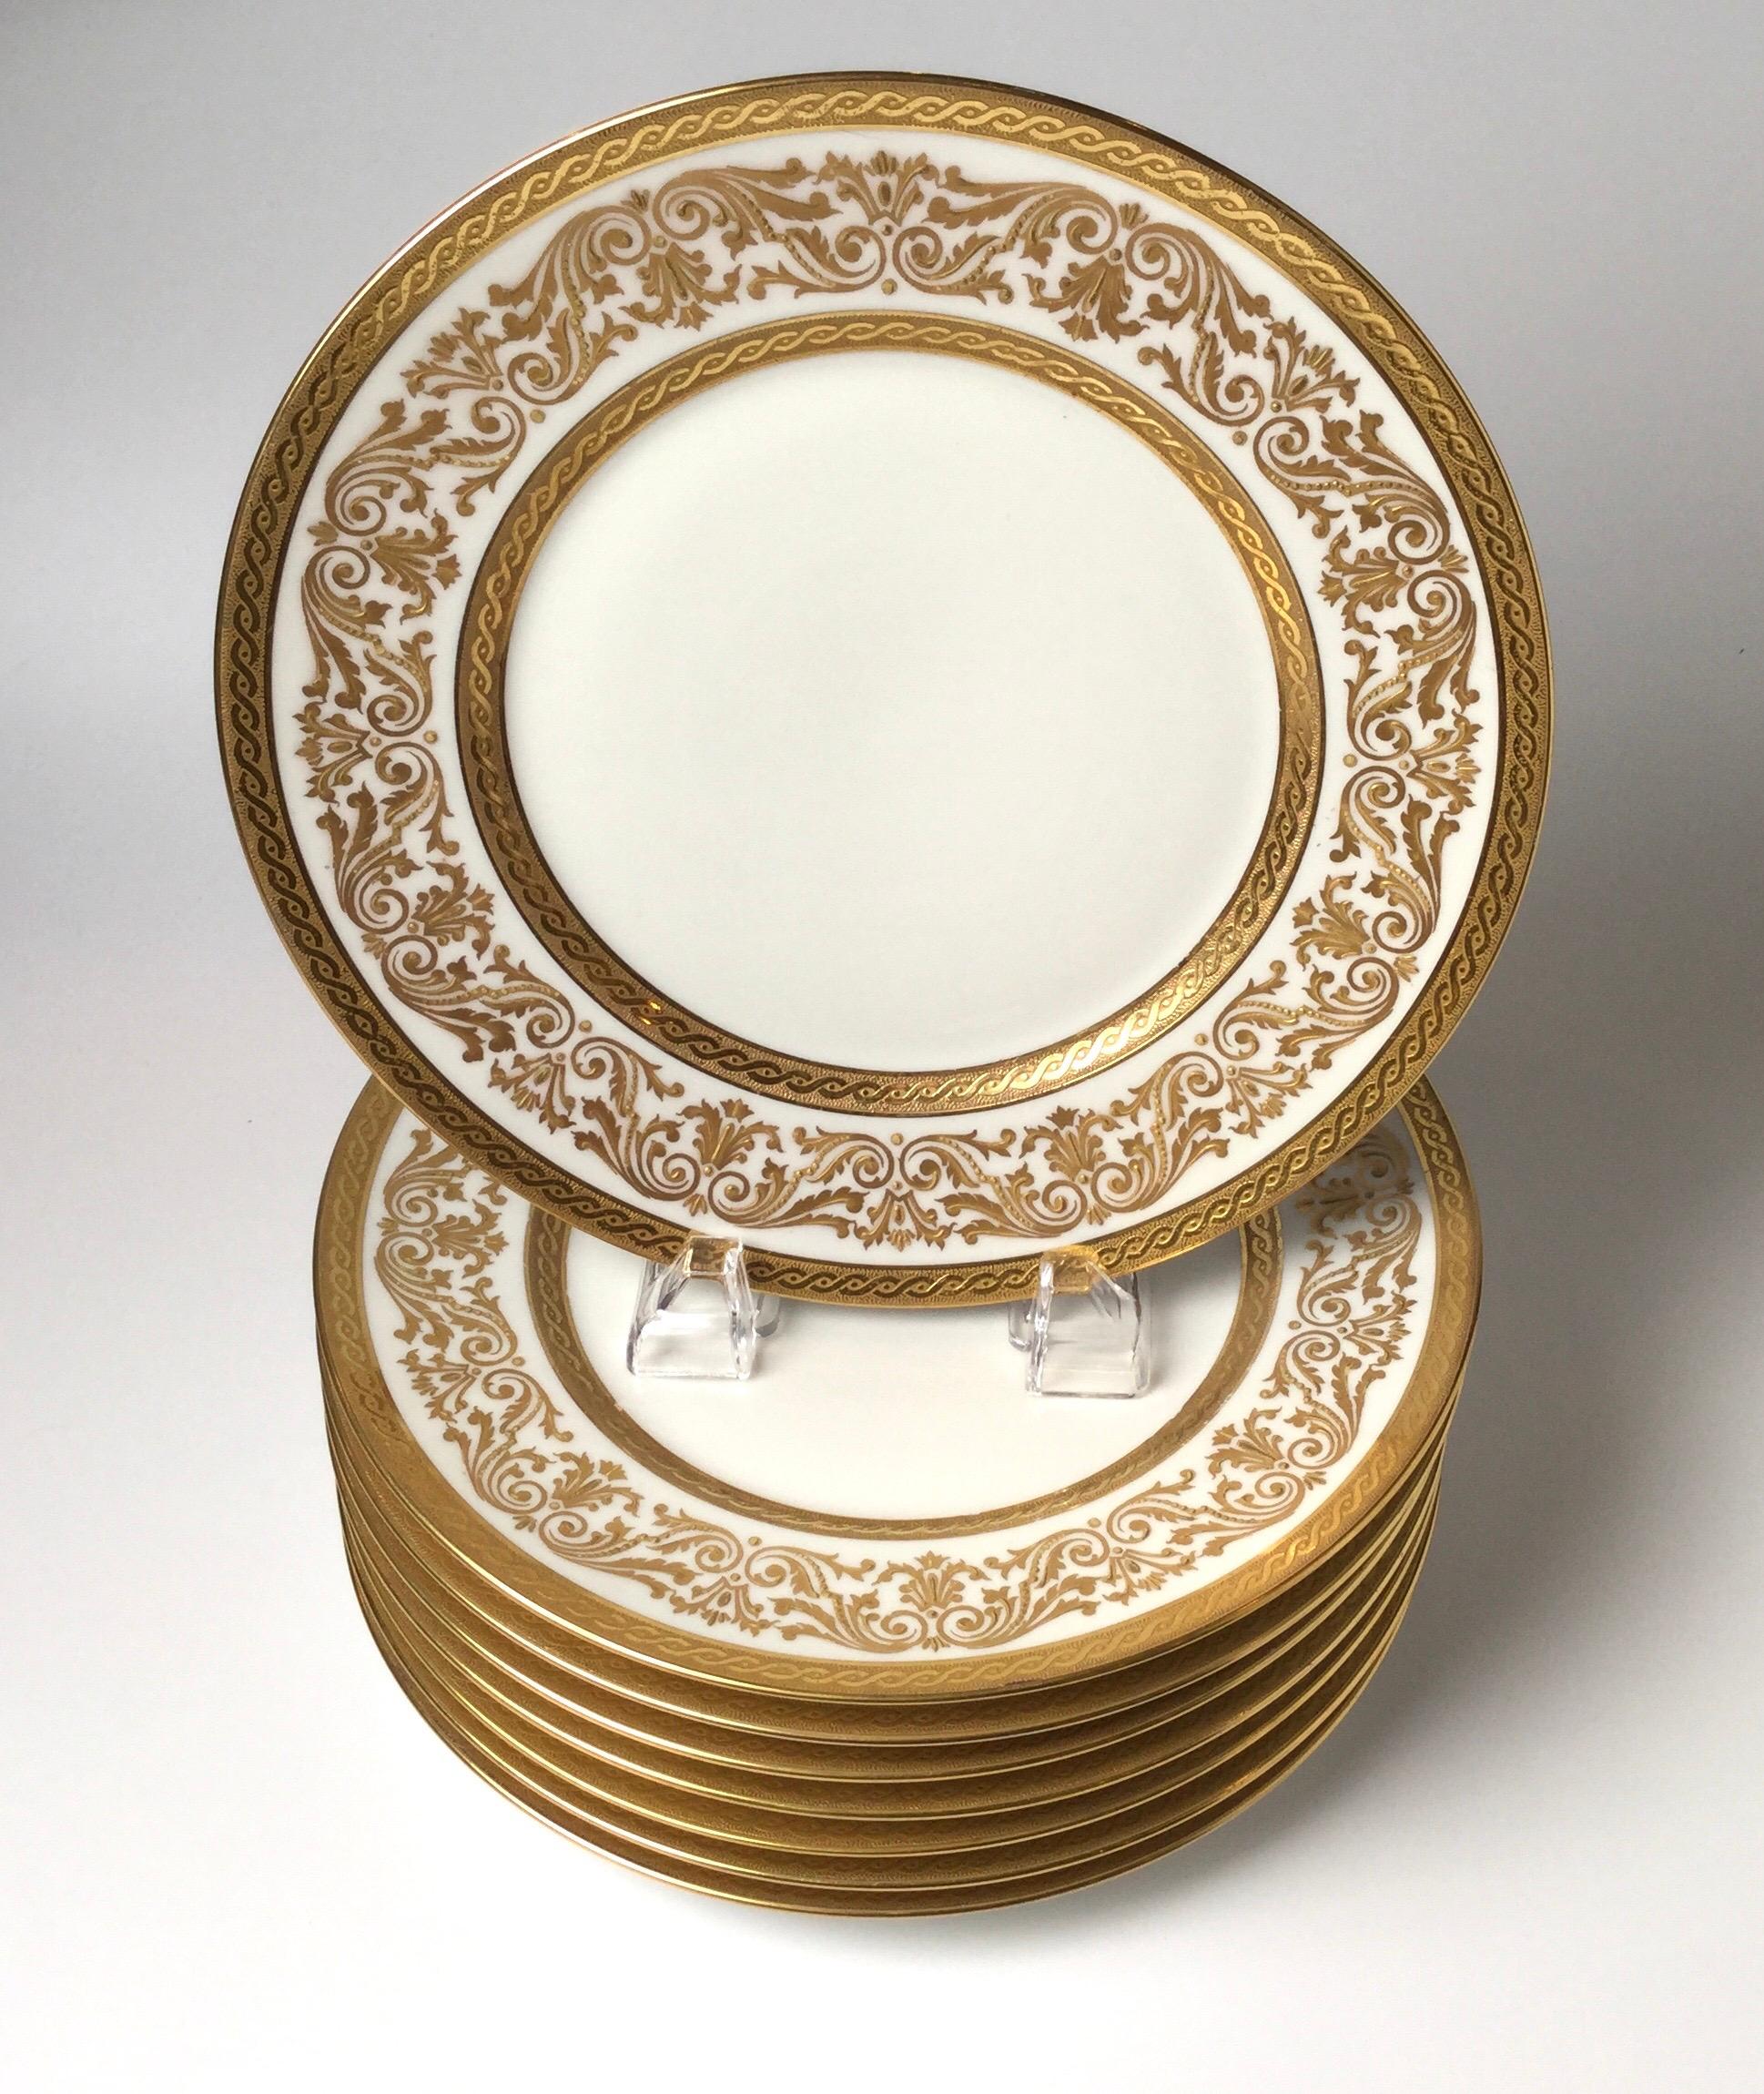 Elegant set of eight raised gilt border luncheon plates marked France, Bernardaud and Co. Limoges, circa 1900. The cream white porcelain hand decorated with lacy gold decoration.